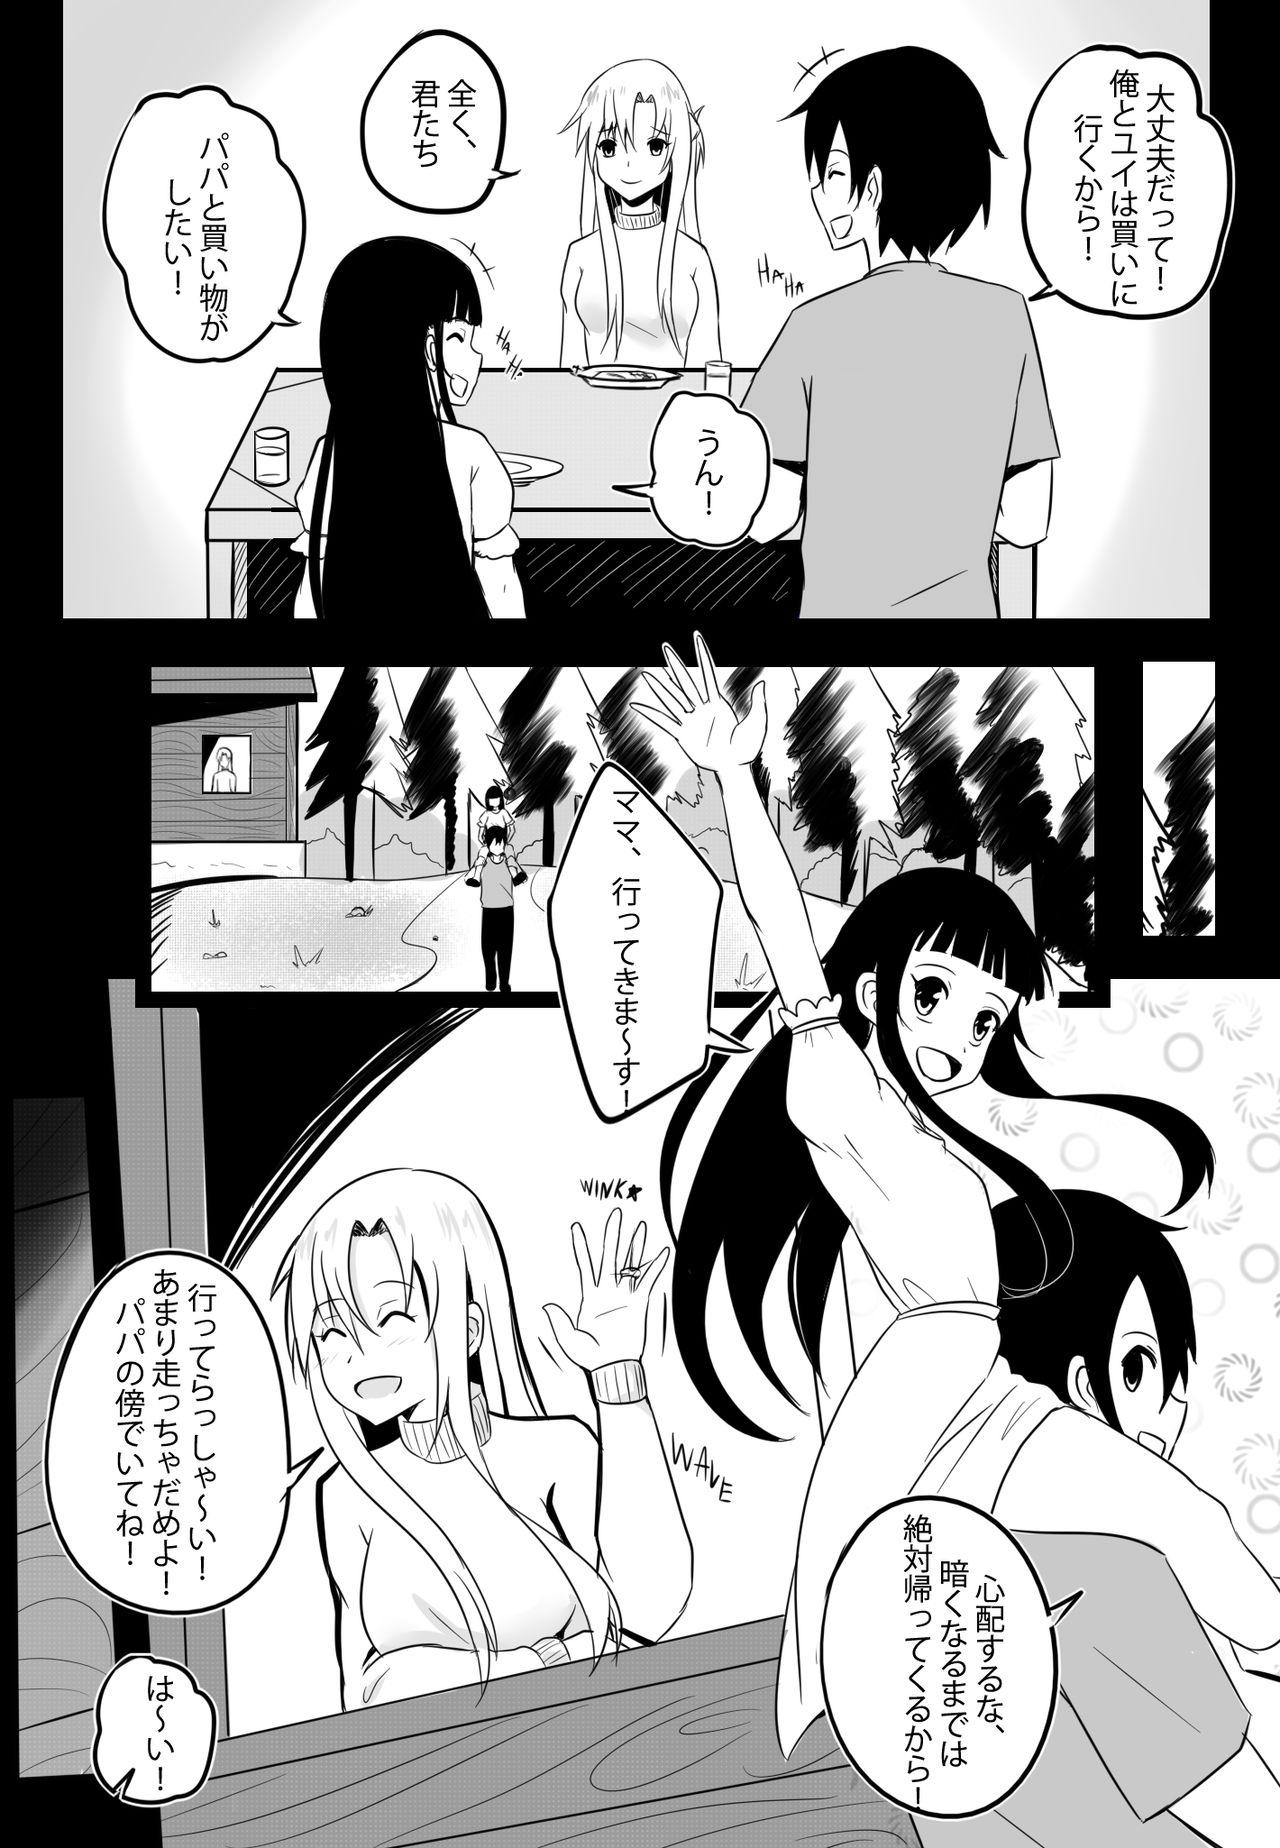 Aunt B-Trayal 19 - Sword art online Hot Girl - Page 4